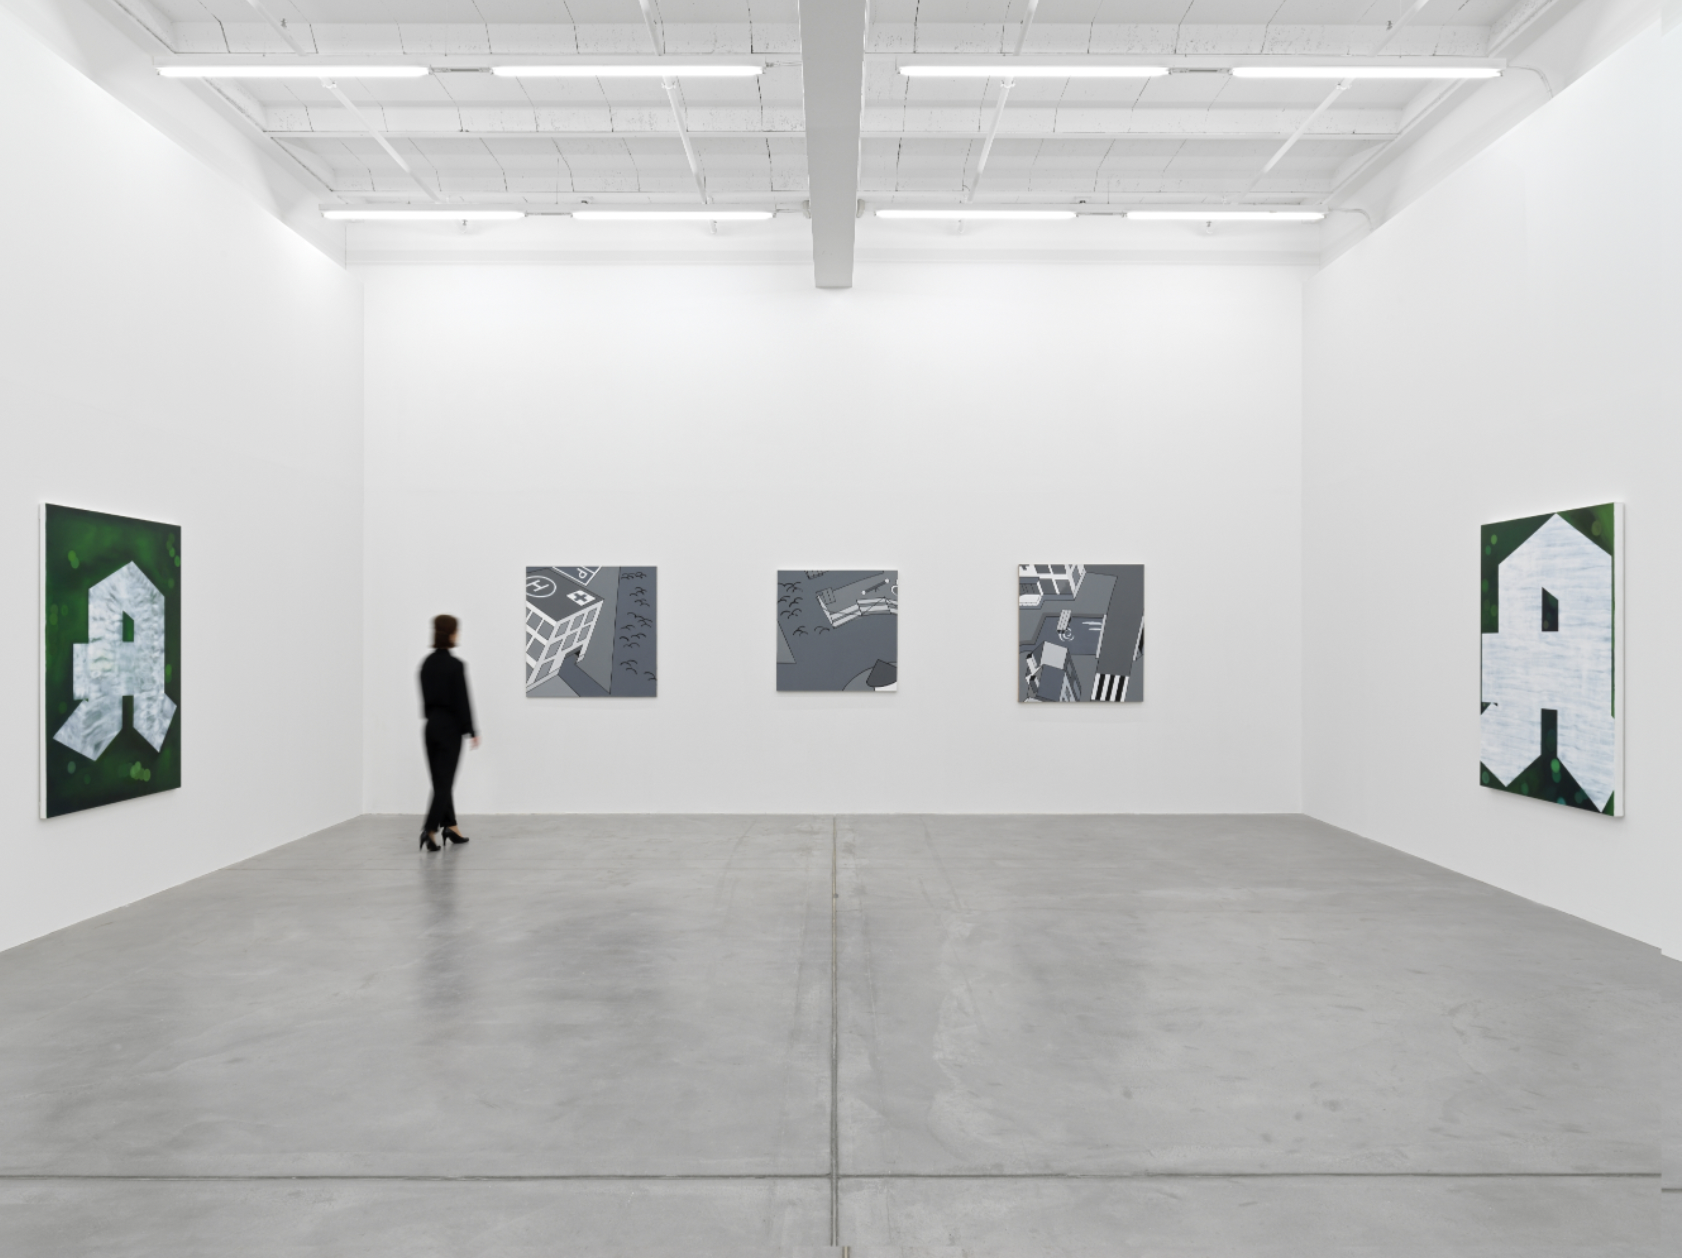 Installation view with works by Laura Langer and Othmar Farré